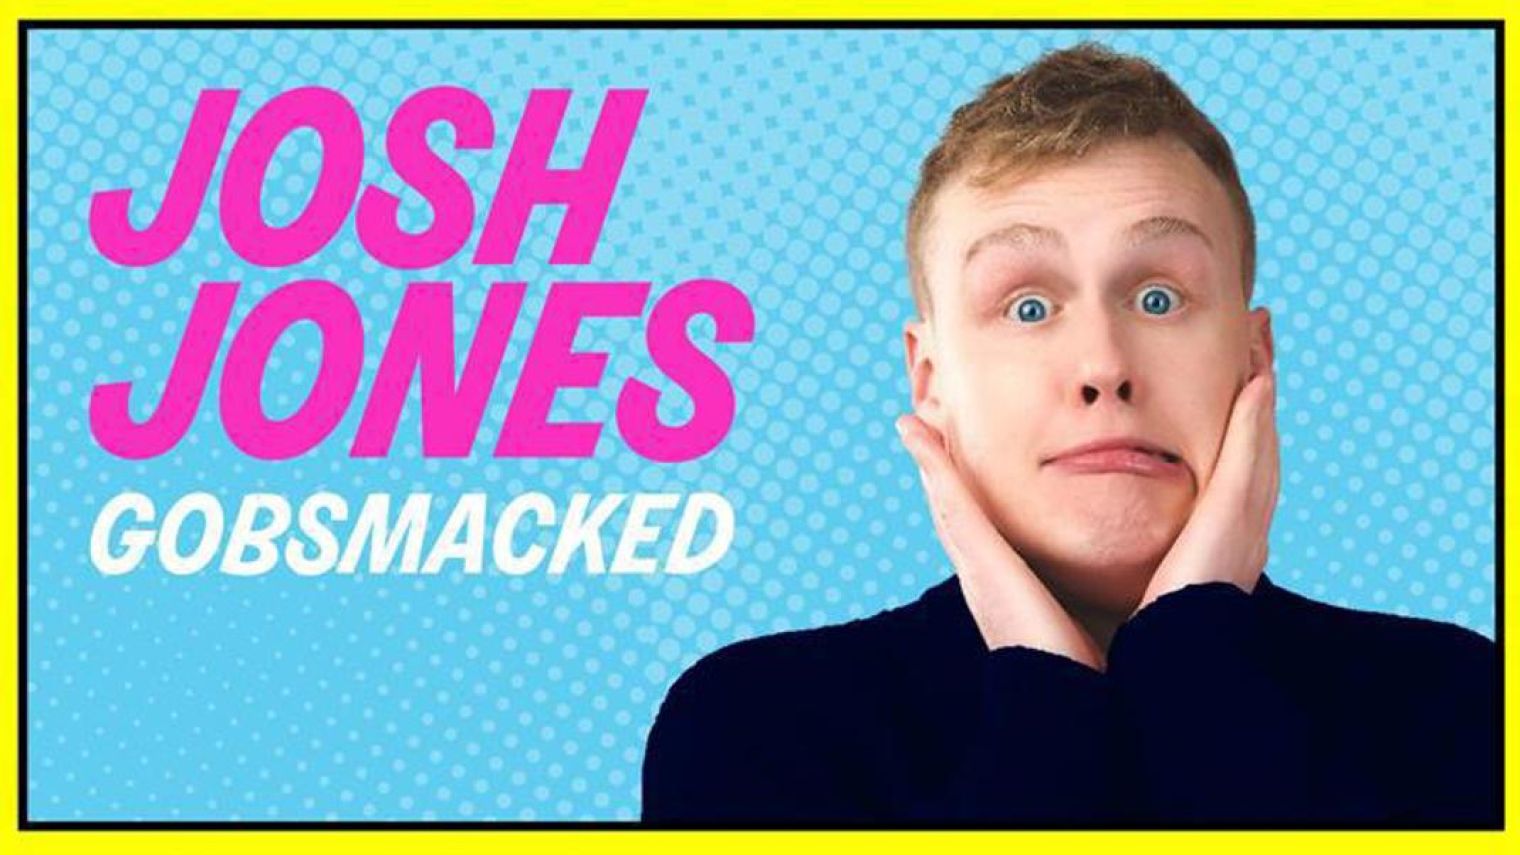 Last year's Edinburgh Best Newcomer nominee Josh Jones returns to the Festival with his new show 'Gobsmacked'